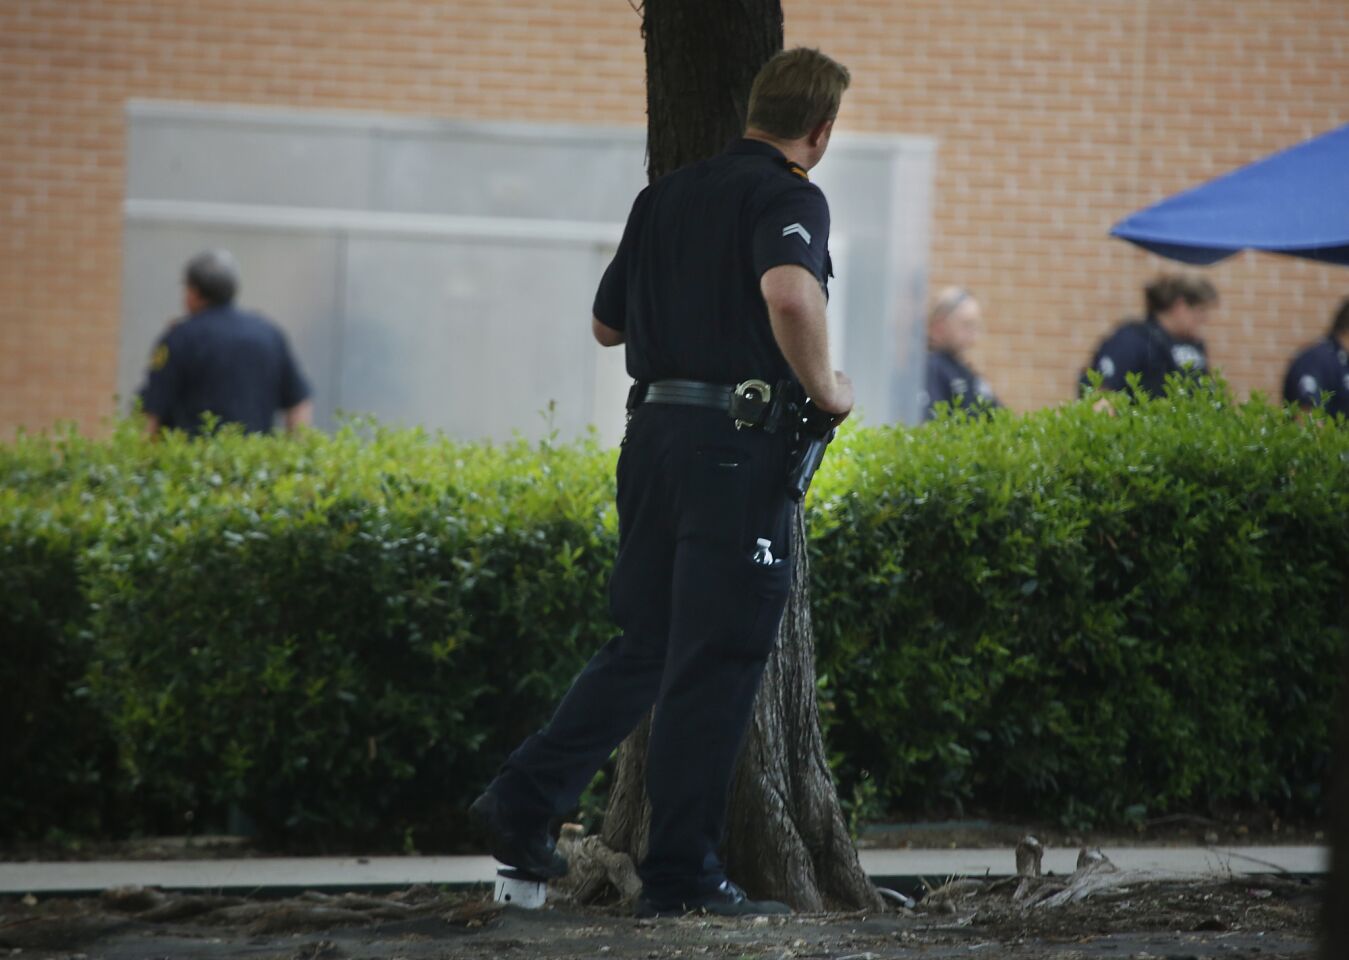 Police locked down the area around the Dallas headquarters because of an unspecified threat.